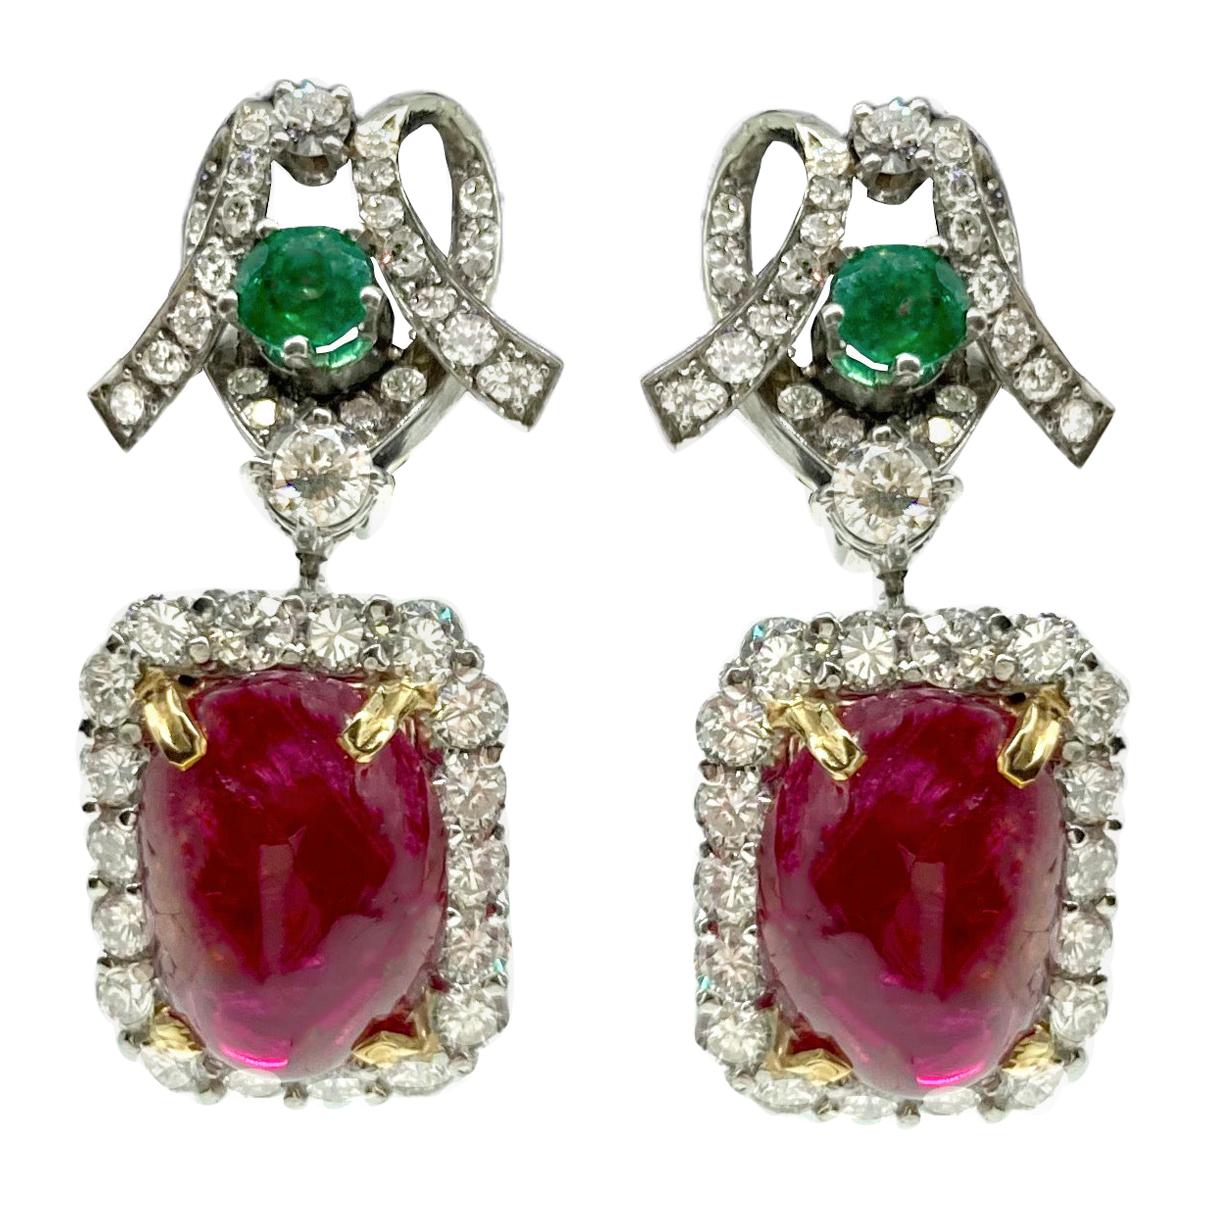 Cabochon Spinel, Emerald, and Diamond White Gold Drop Earrings